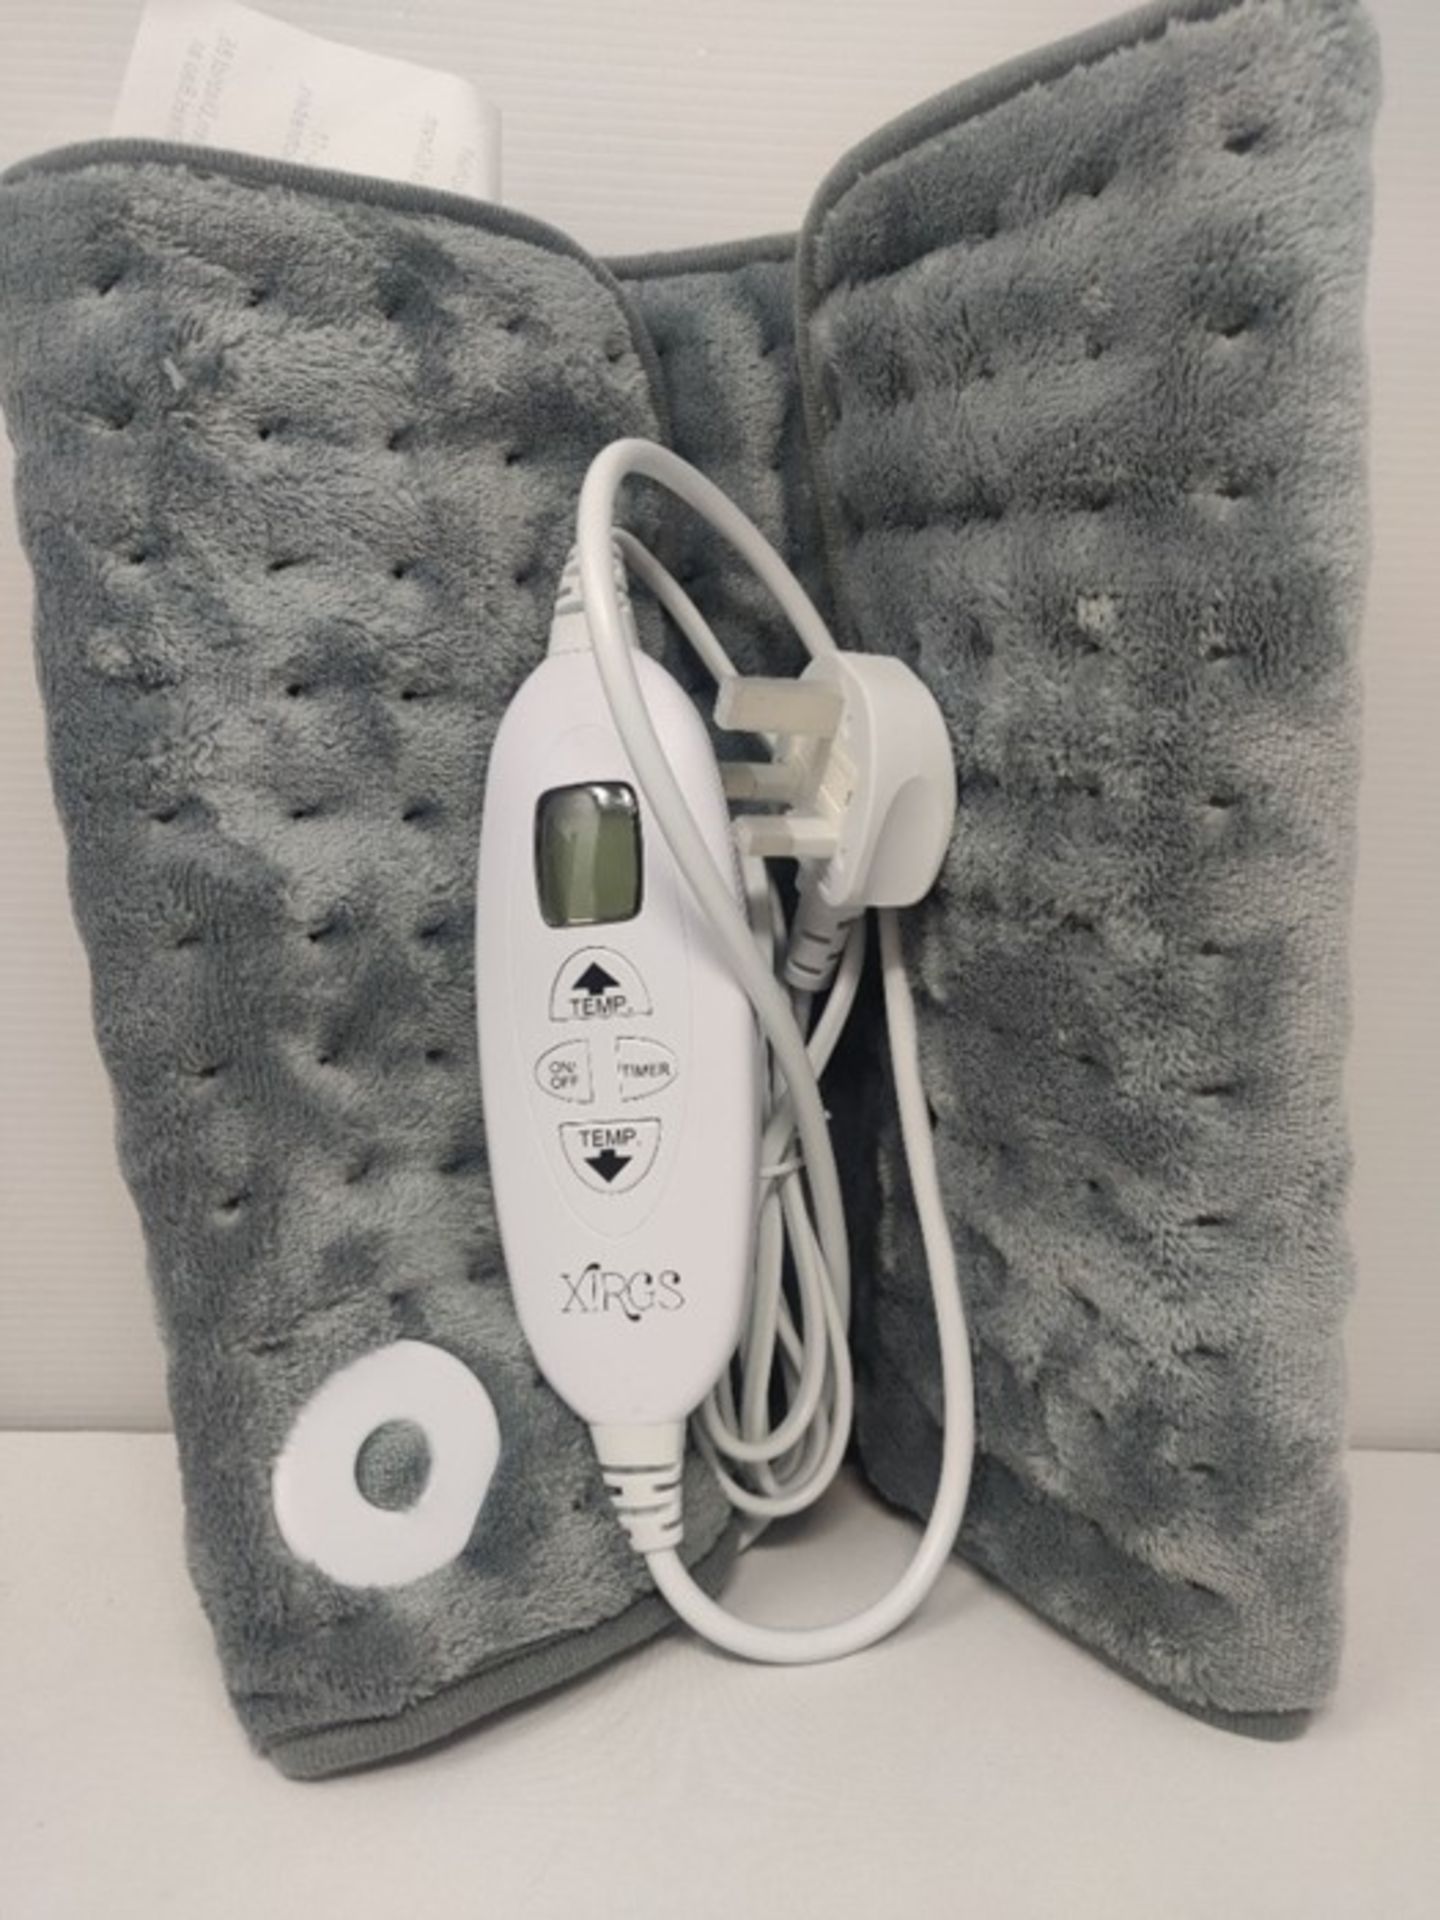 XIRGS Heating Pad, Electric Heating Pad for Back Cramps Neck Pain Relief, Dry & Moist - Image 3 of 3